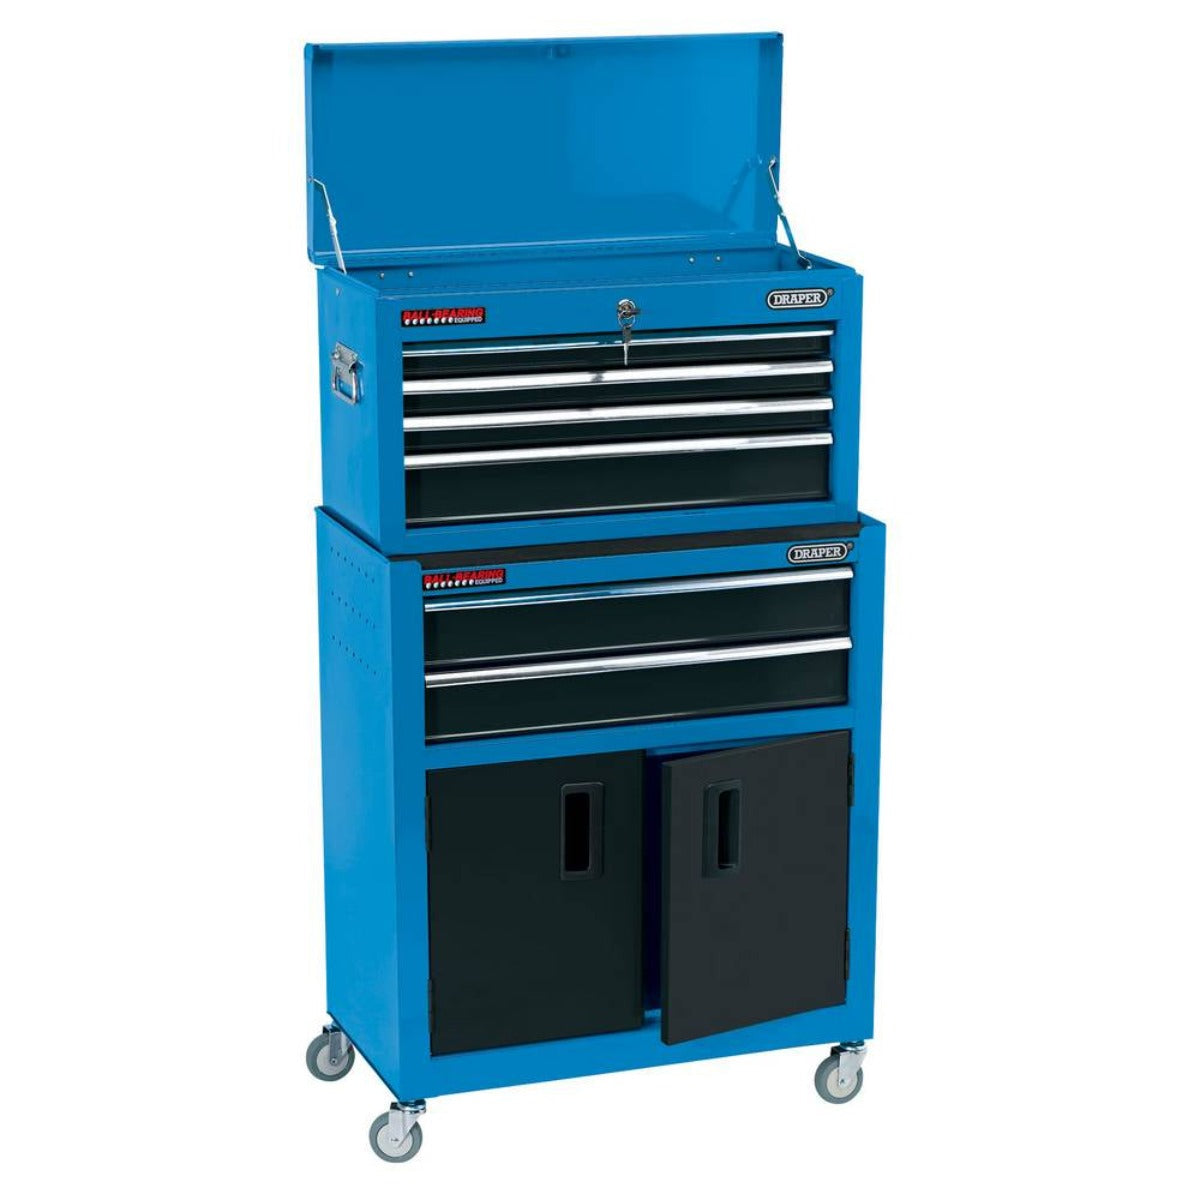 DRAPER 6 DRAWER 24" COMBINED ROLLER CABINET AND TOOL CHEST